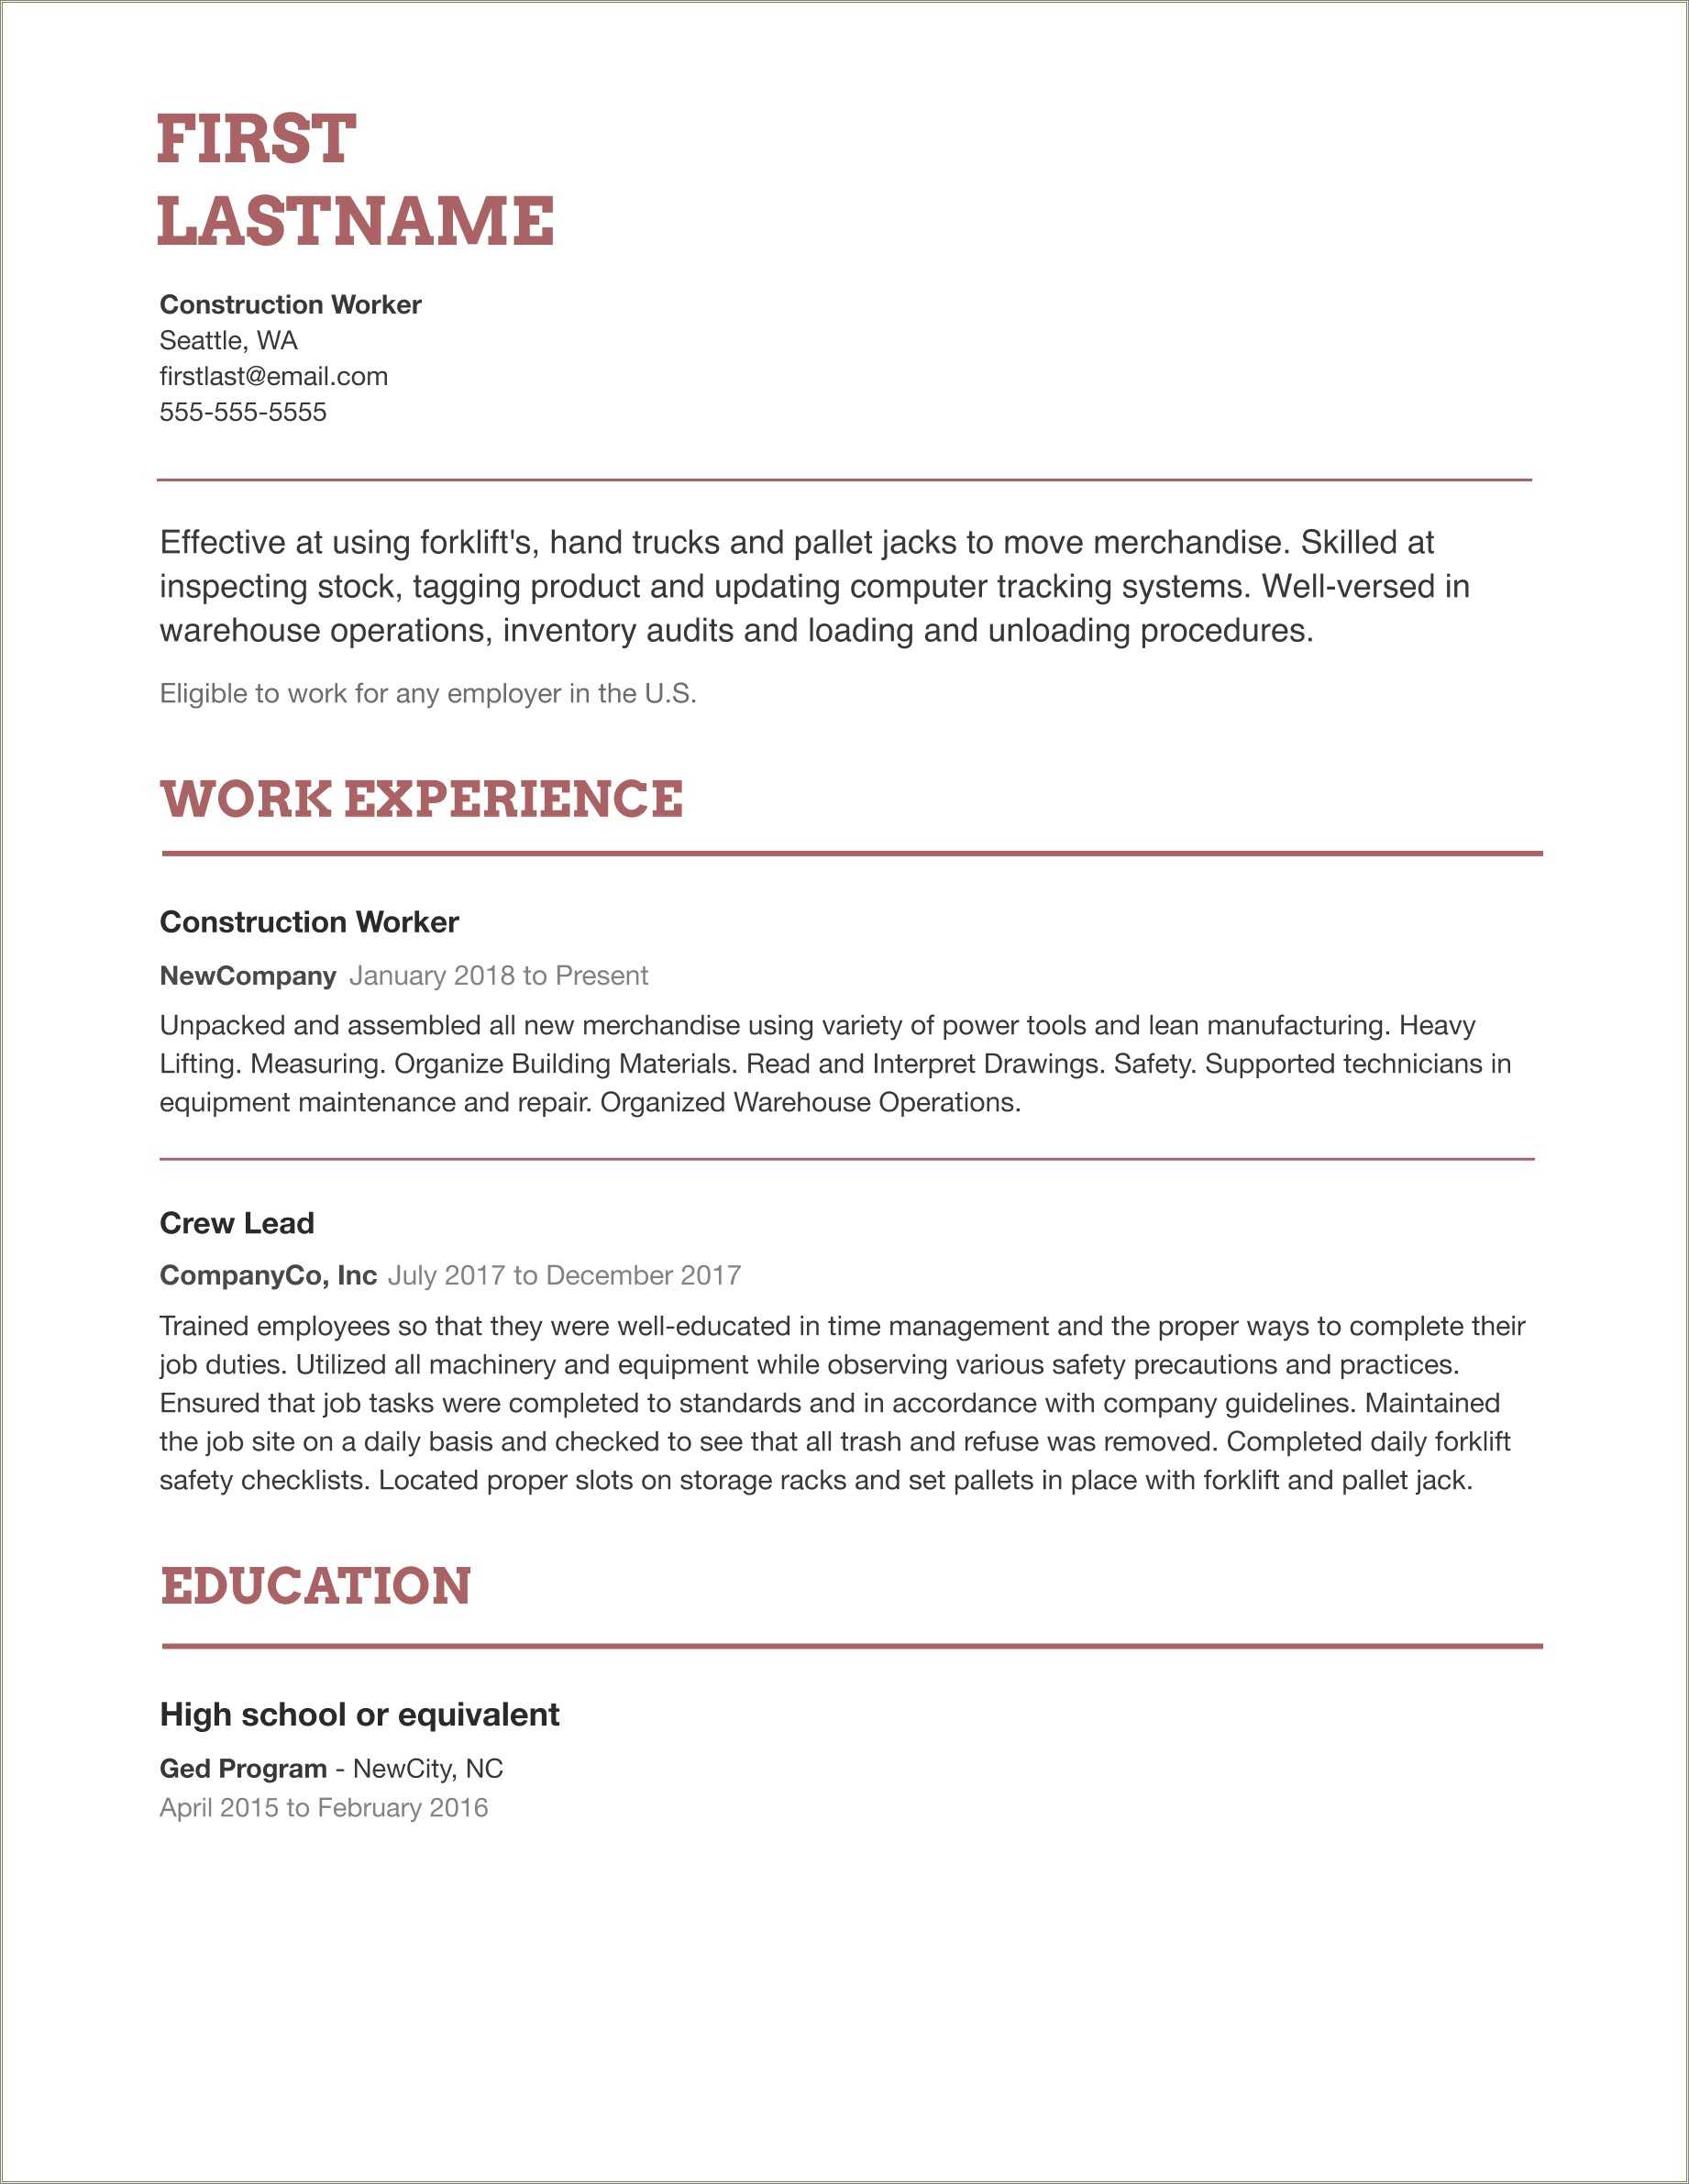 any-actual-free-resume-builders-resume-example-gallery